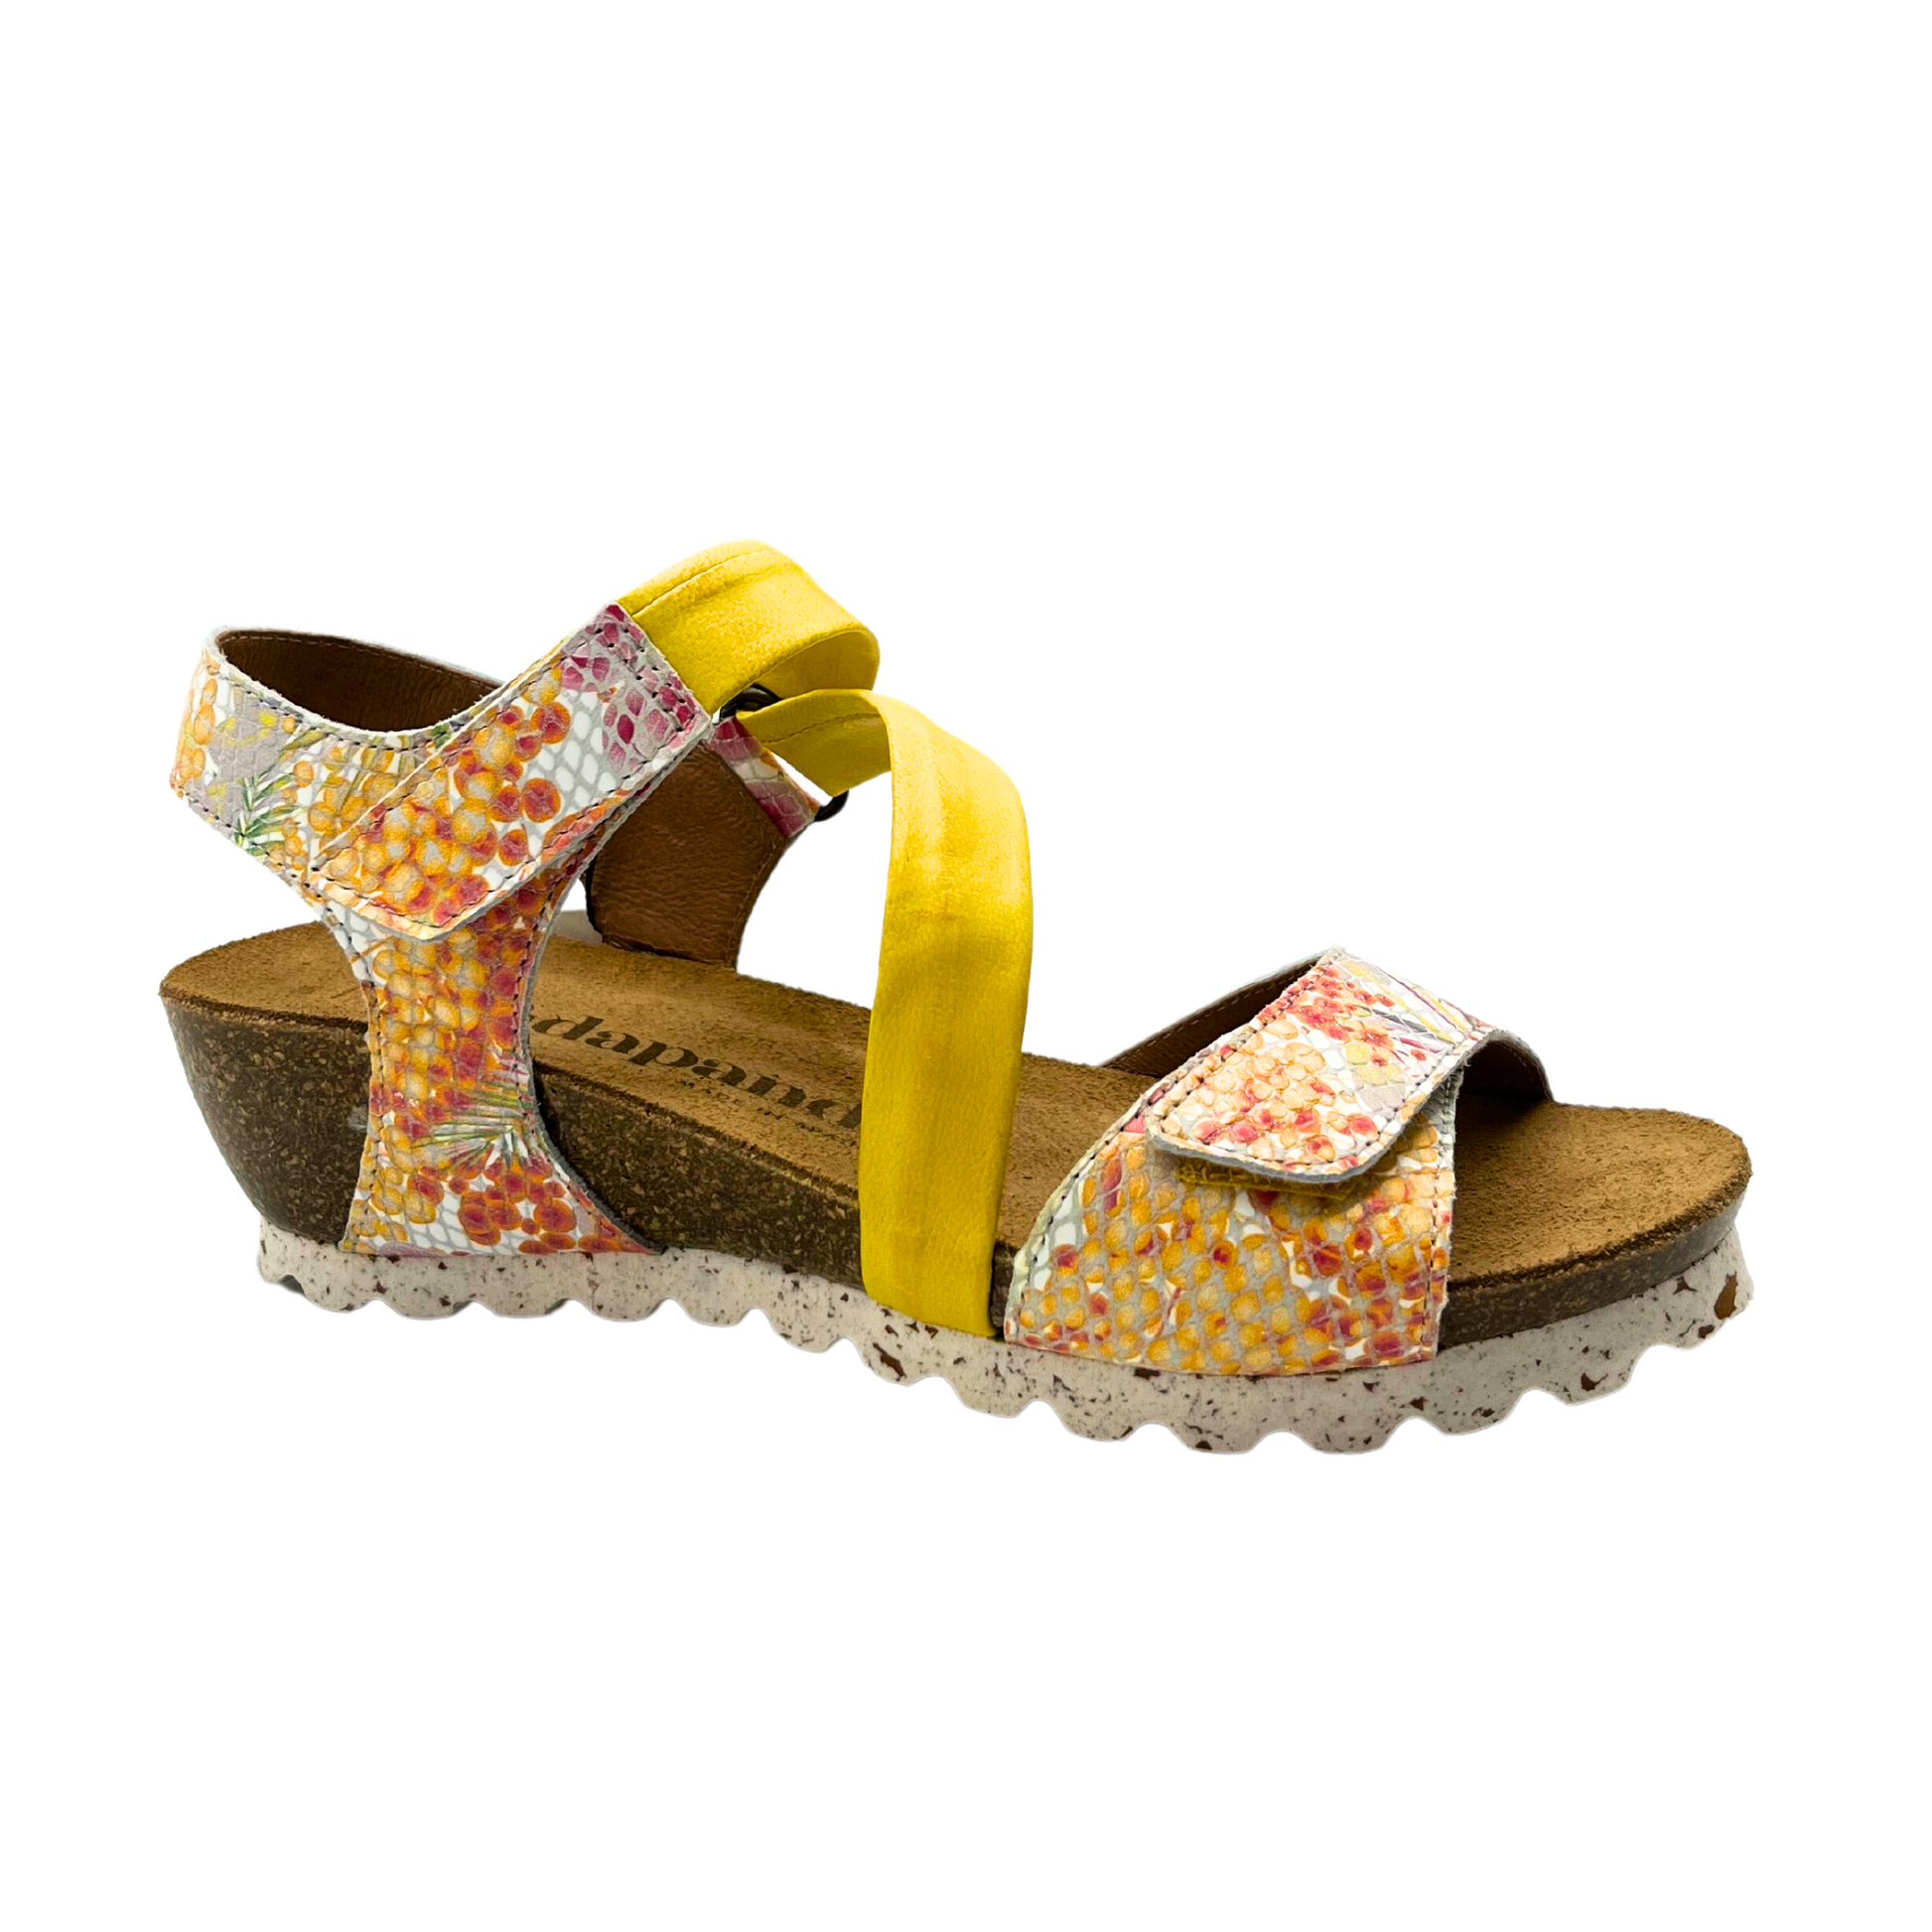 Angled side view of a low wedge sandal.  Good, solid construction with great support.  Shown in a floral pattern with a bright yellow strap across the top of foot